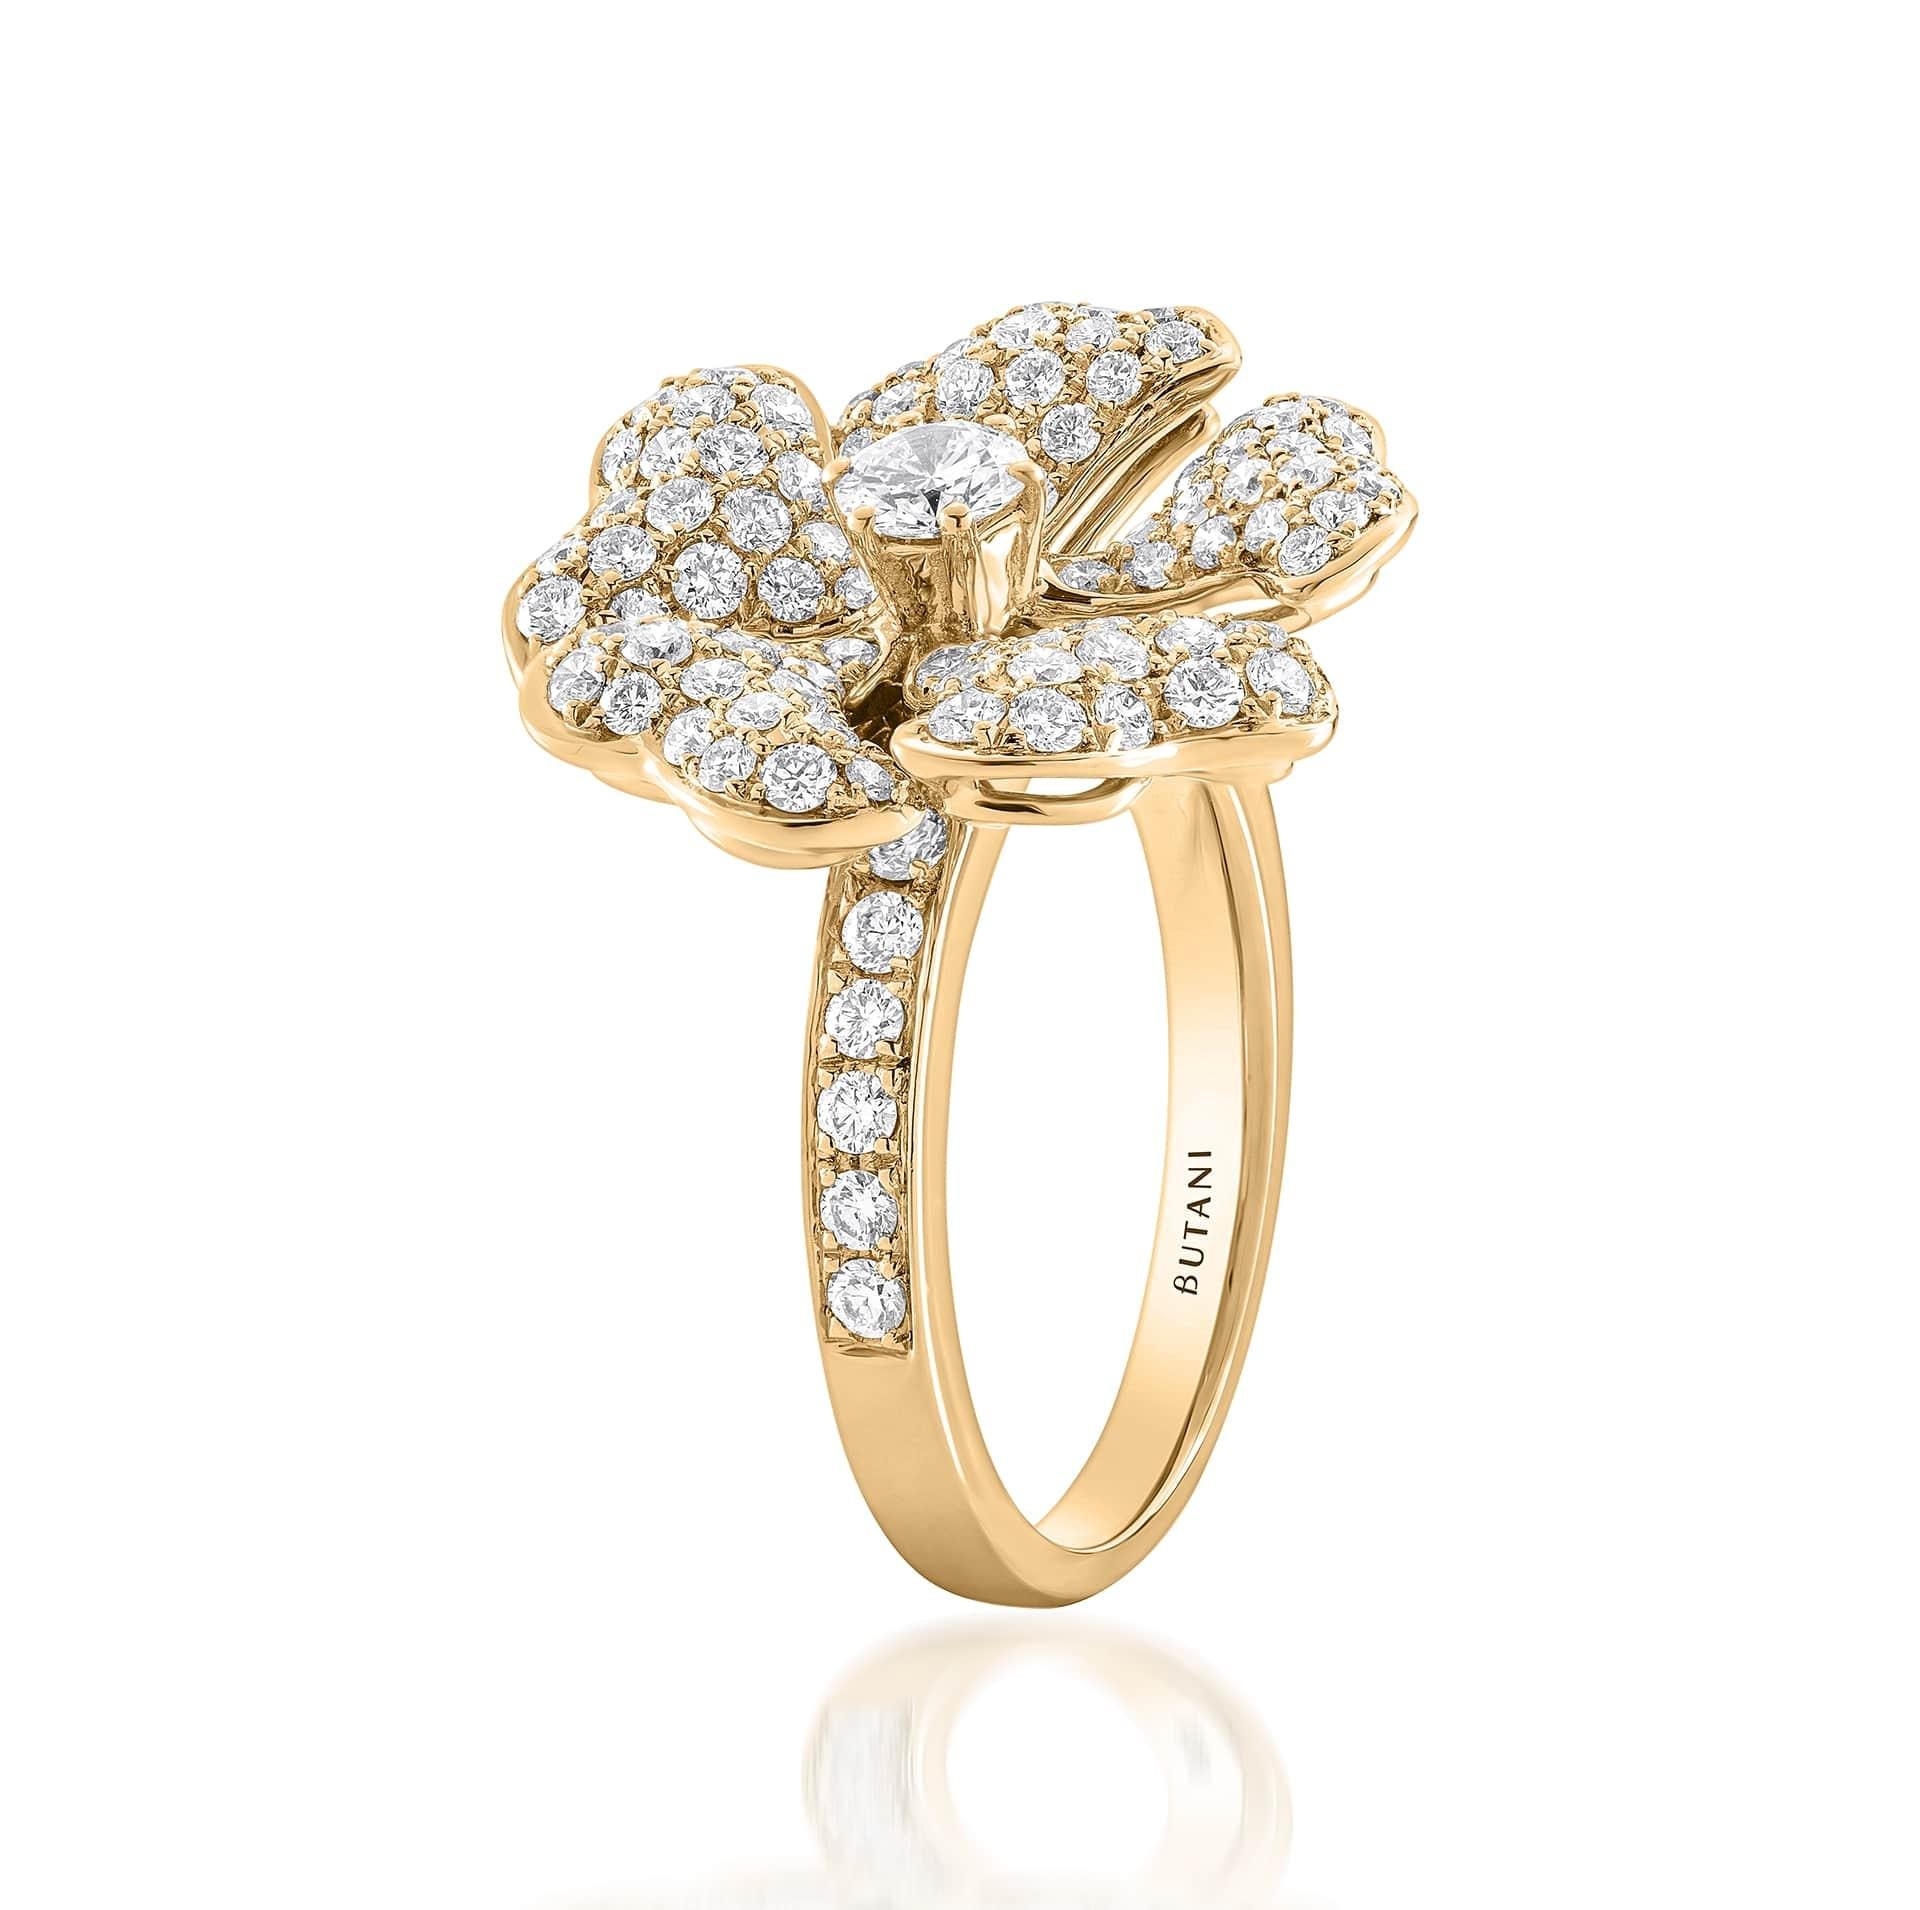 Bloom Gold and Pavé Diamond Ring in 18K Yellow Gold

Inspired by the exquisite petals of the alpine cinquefoil flower, the Bloom collection combines the richness of diamonds and precious metals with the light versatility of this delicate,